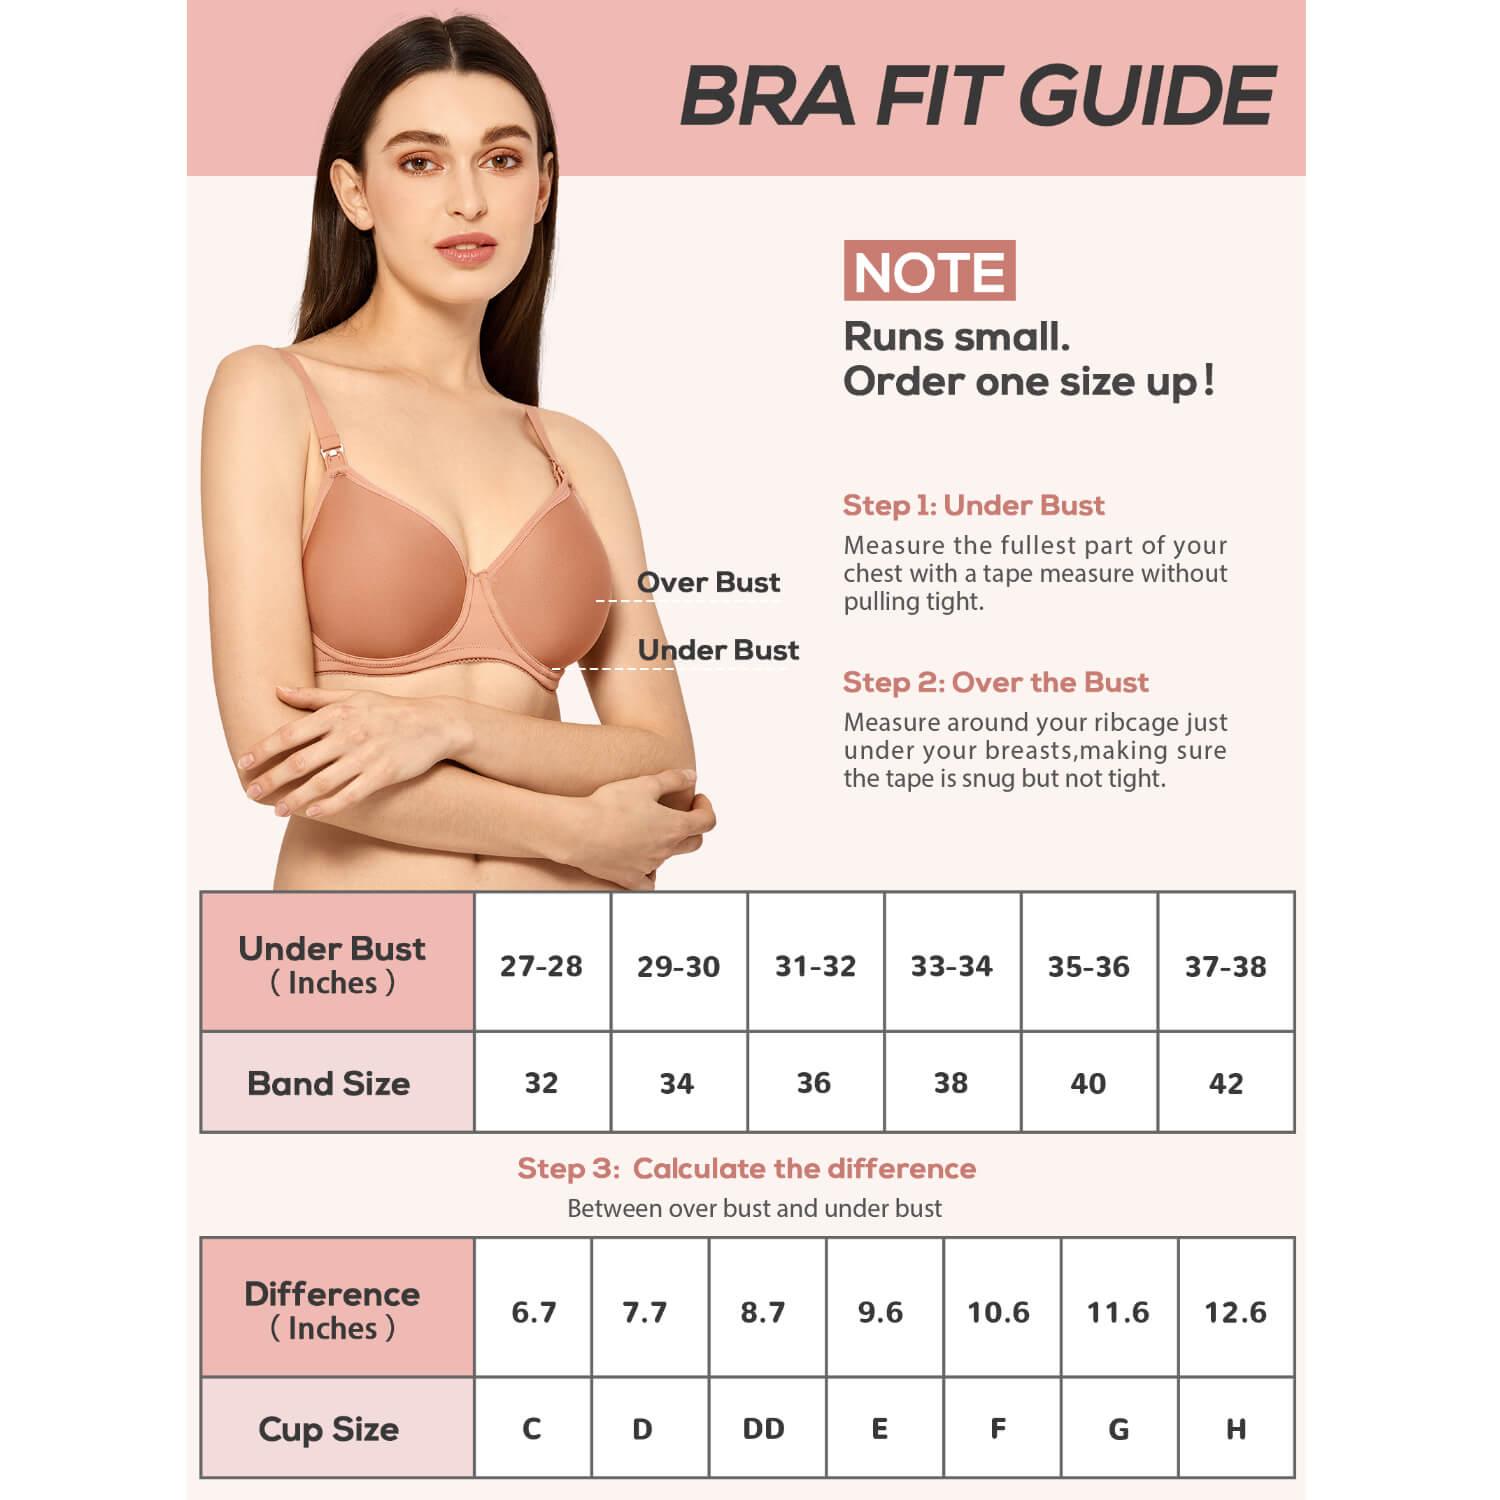 32C Bra Size in C Cup Sizes Basic by Anita Maternity and Nursing Bras